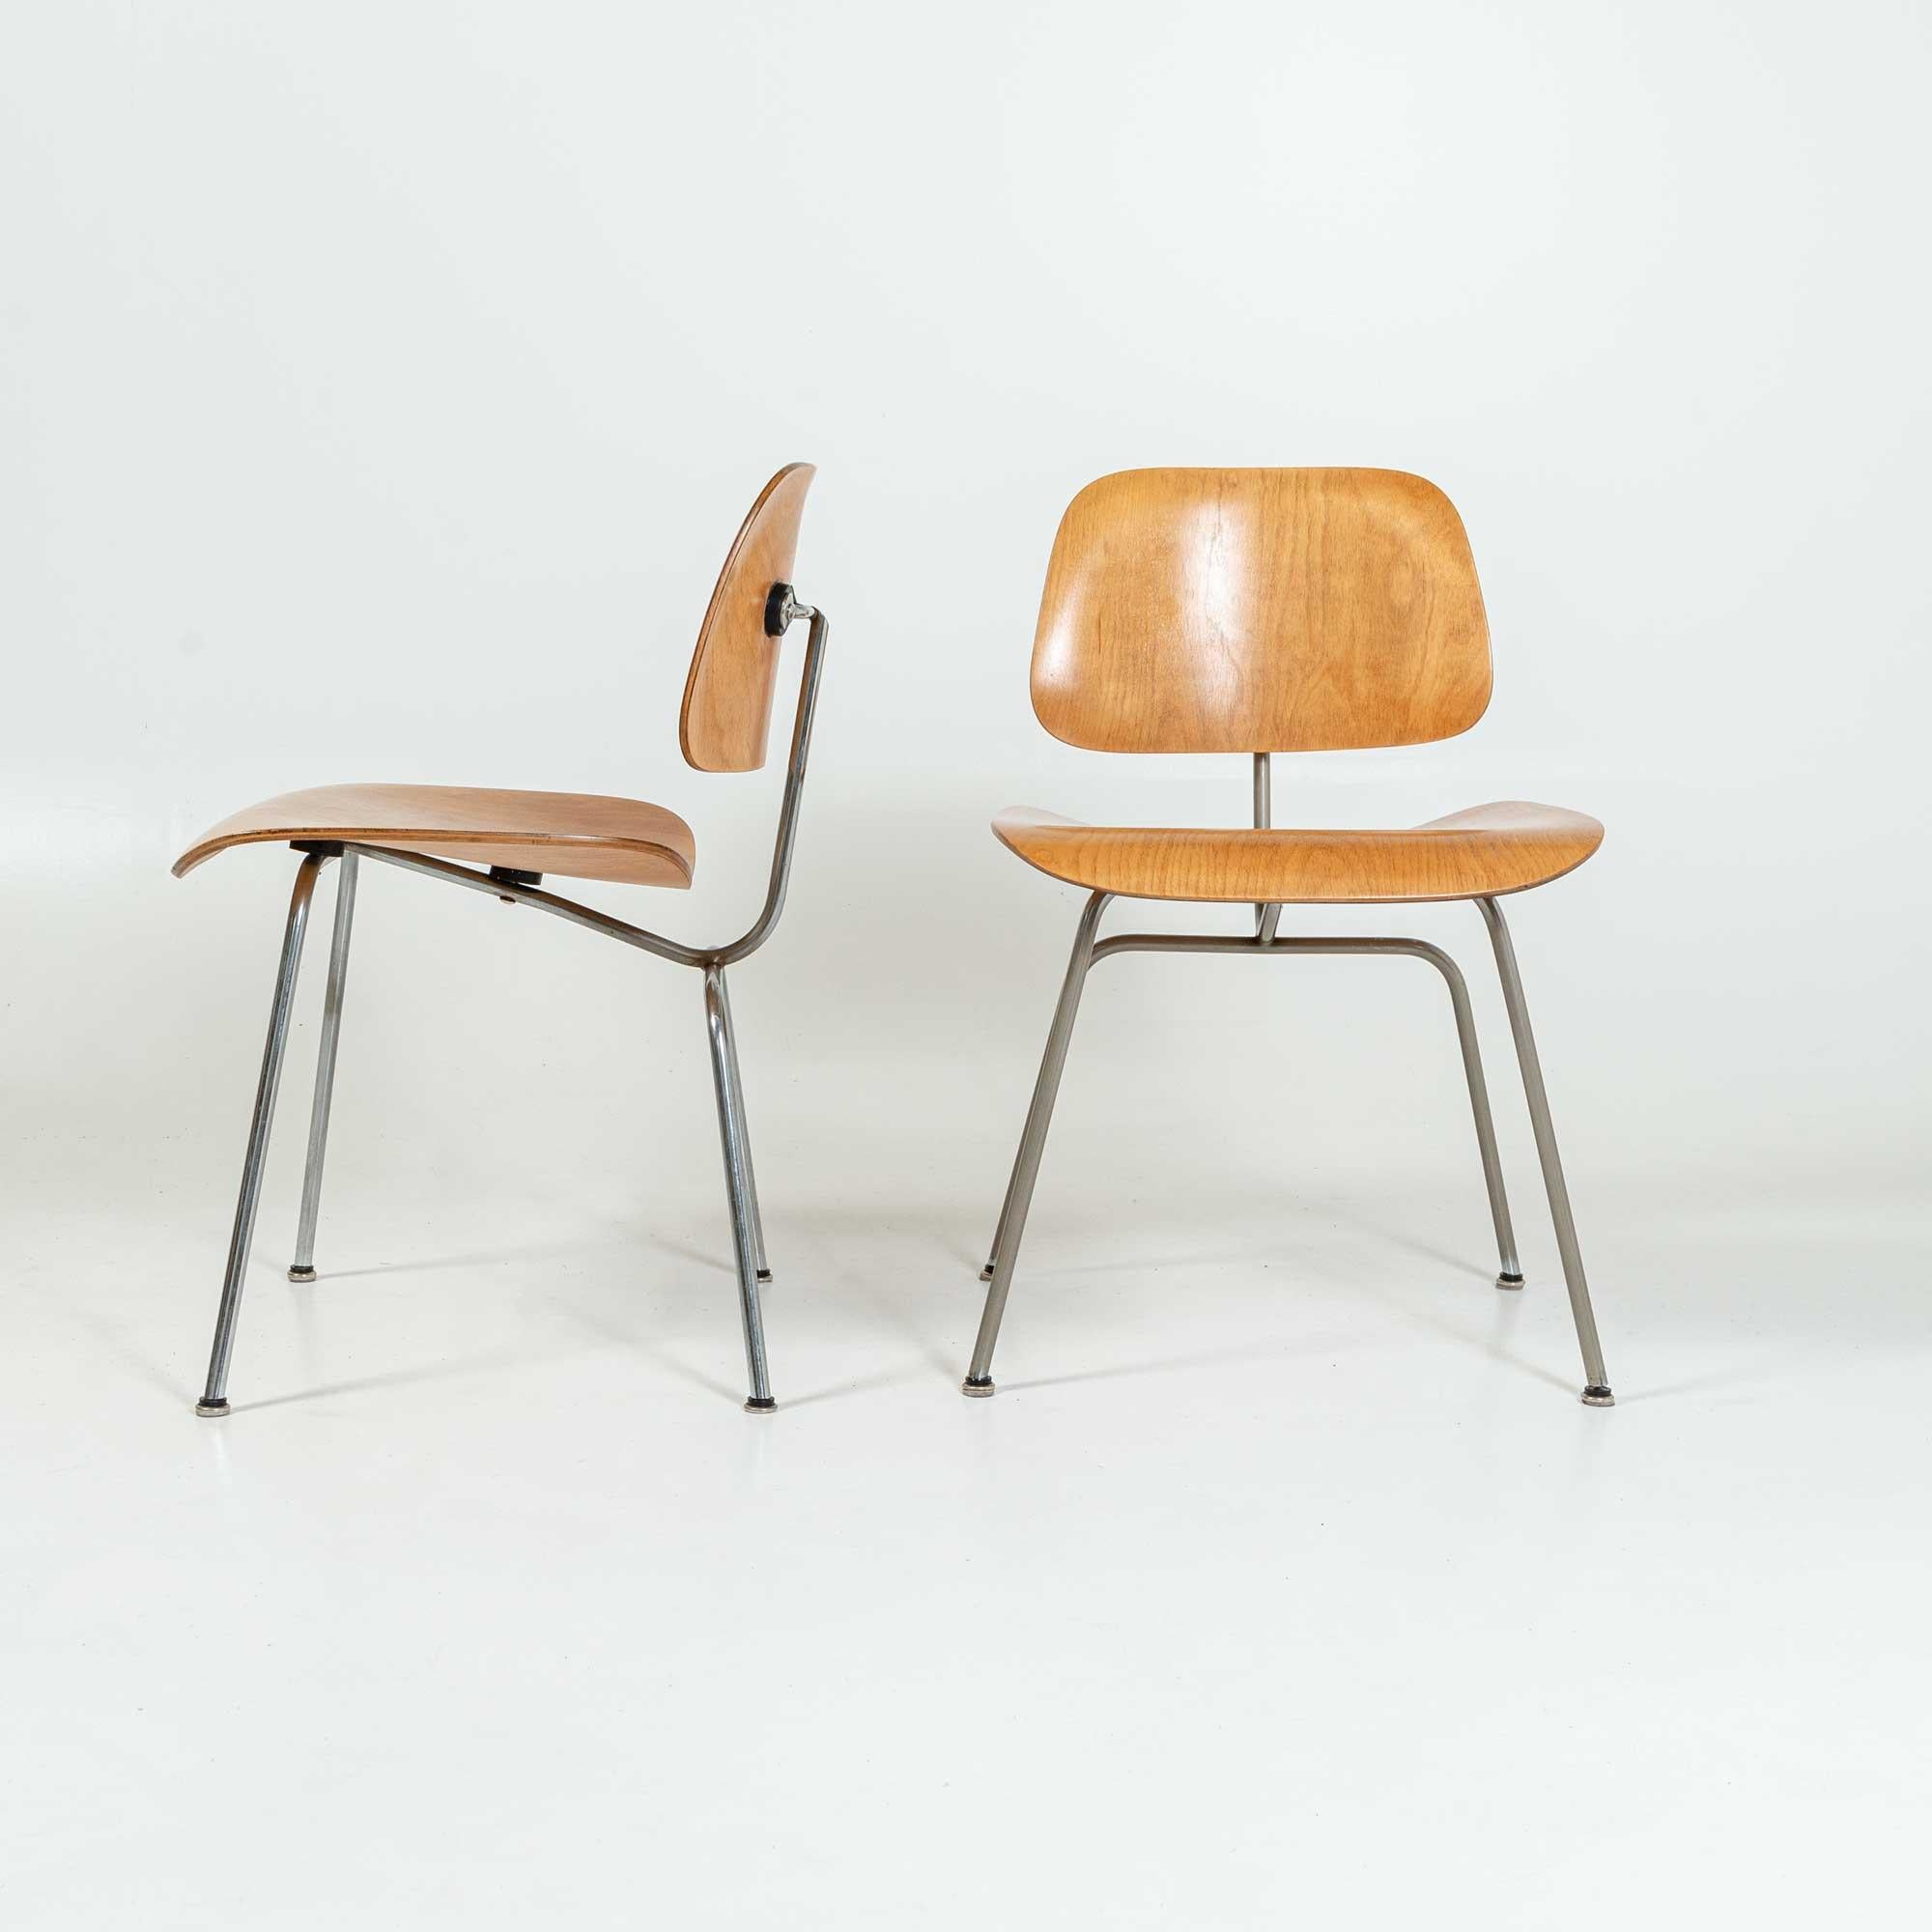 Other Set of 4 First Edition Eames Evans DCM Chairs For Sale